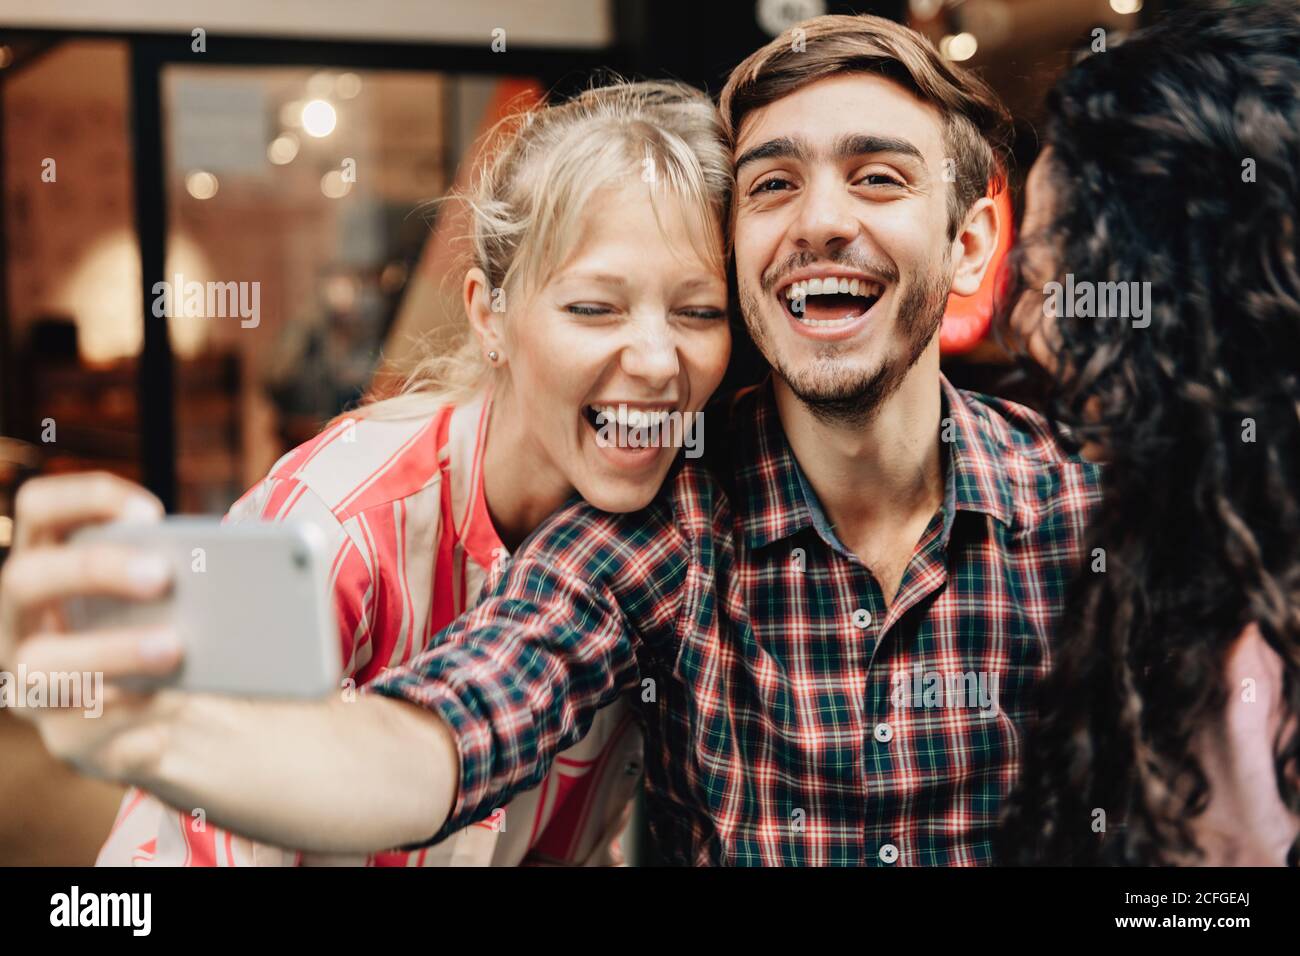 Cheerful friends taking a selfie Stock Photo